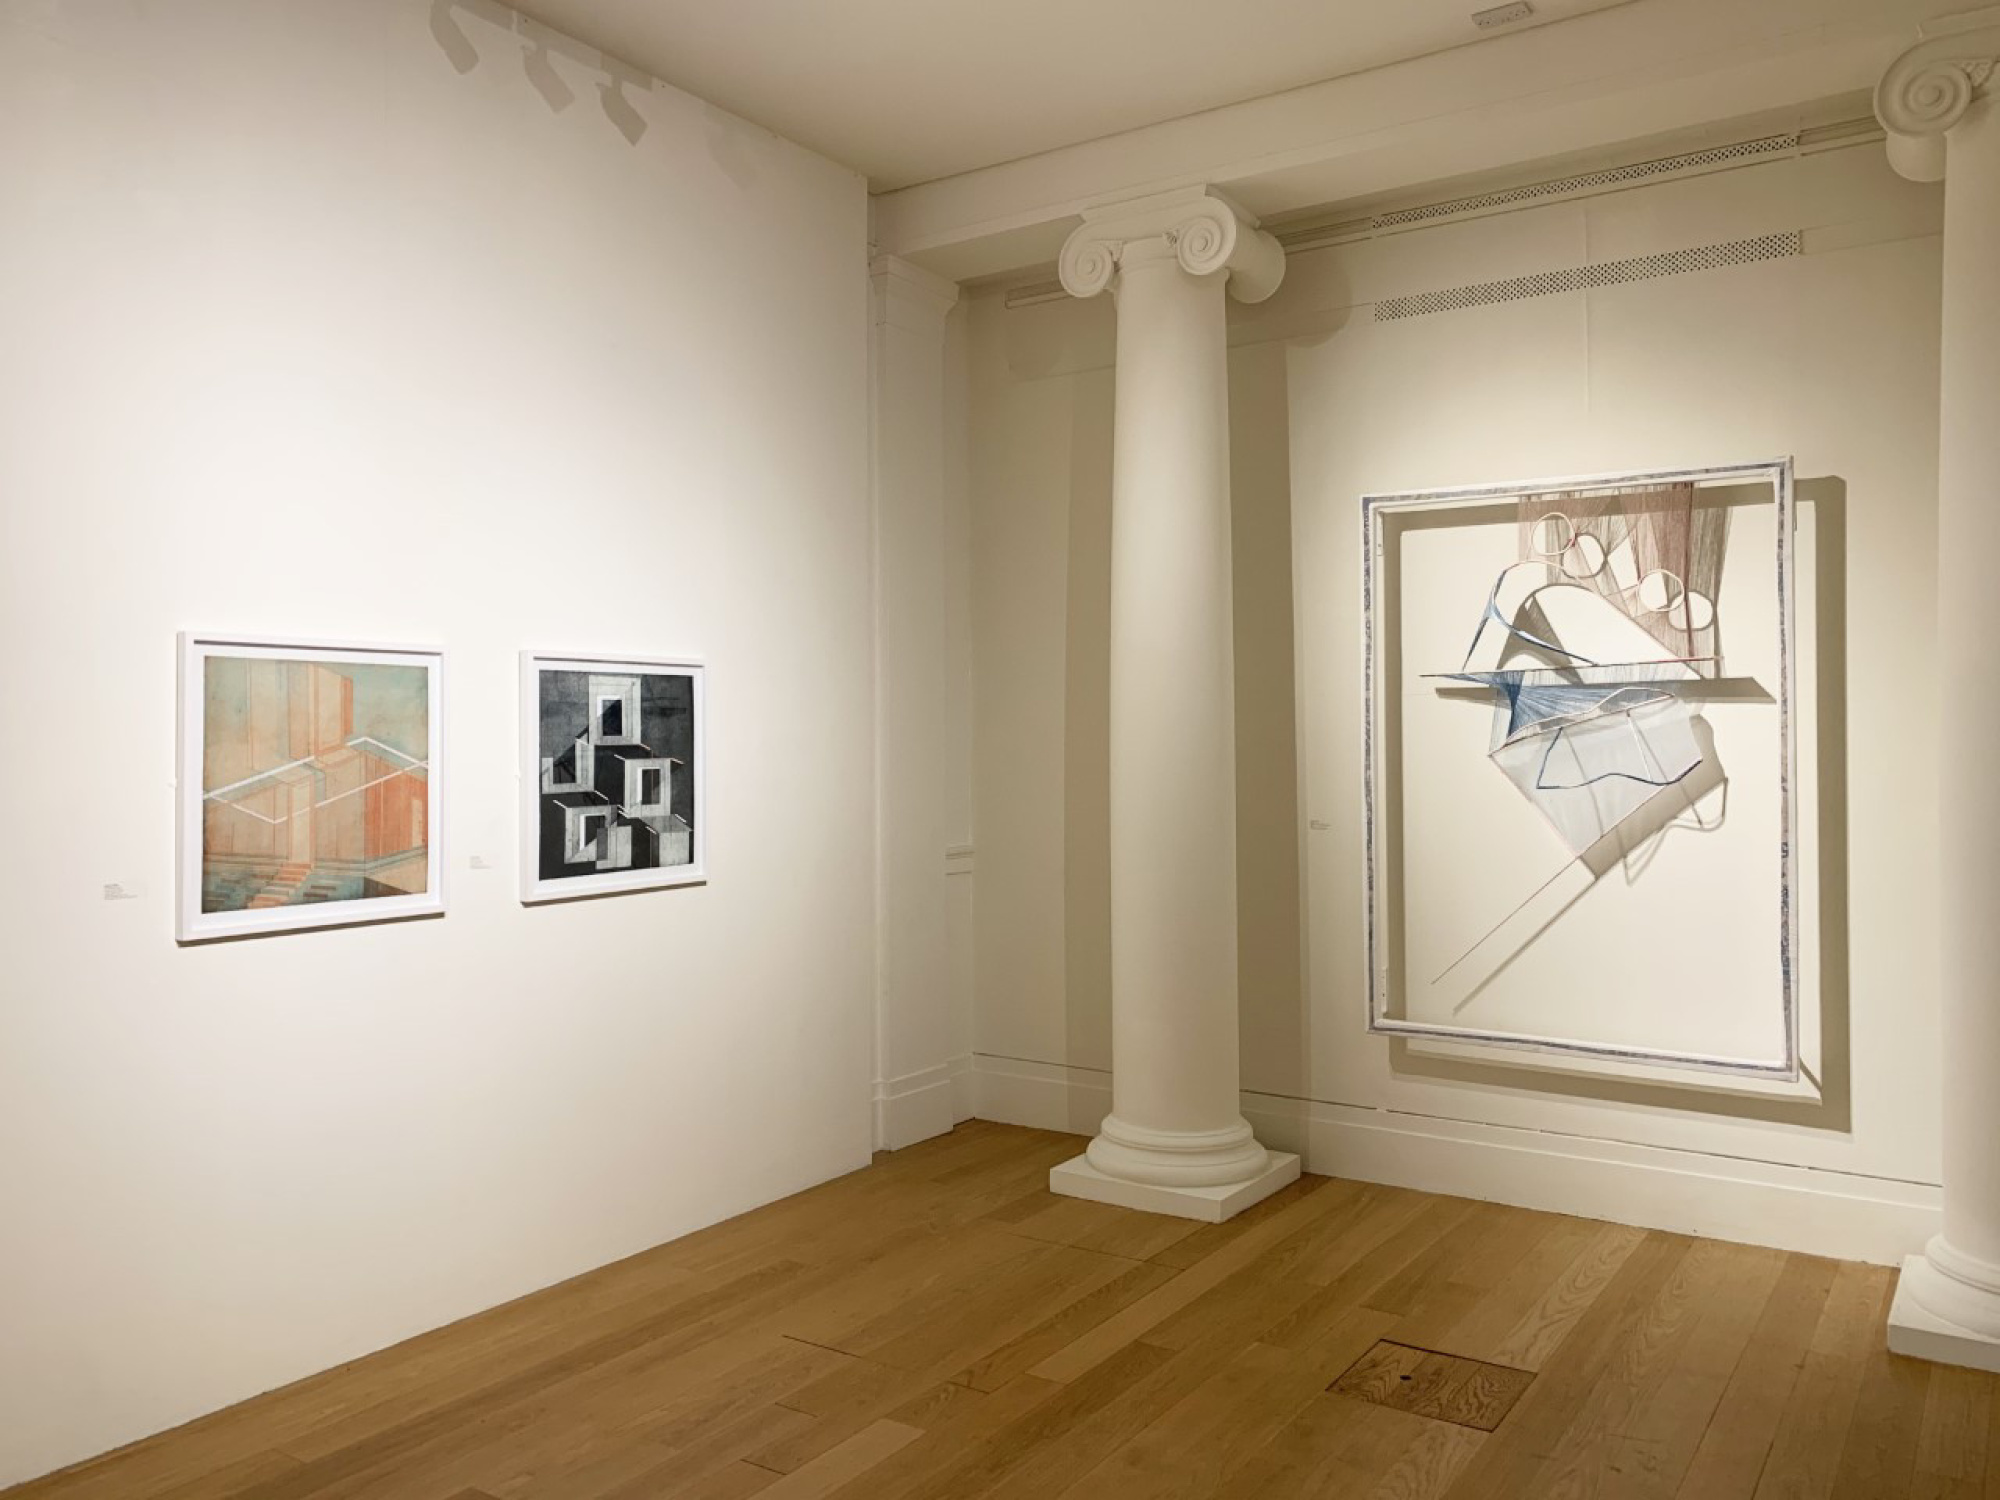 Reduct: Abstraction and Geometry in Scottish Art - Royal Scottish Academy